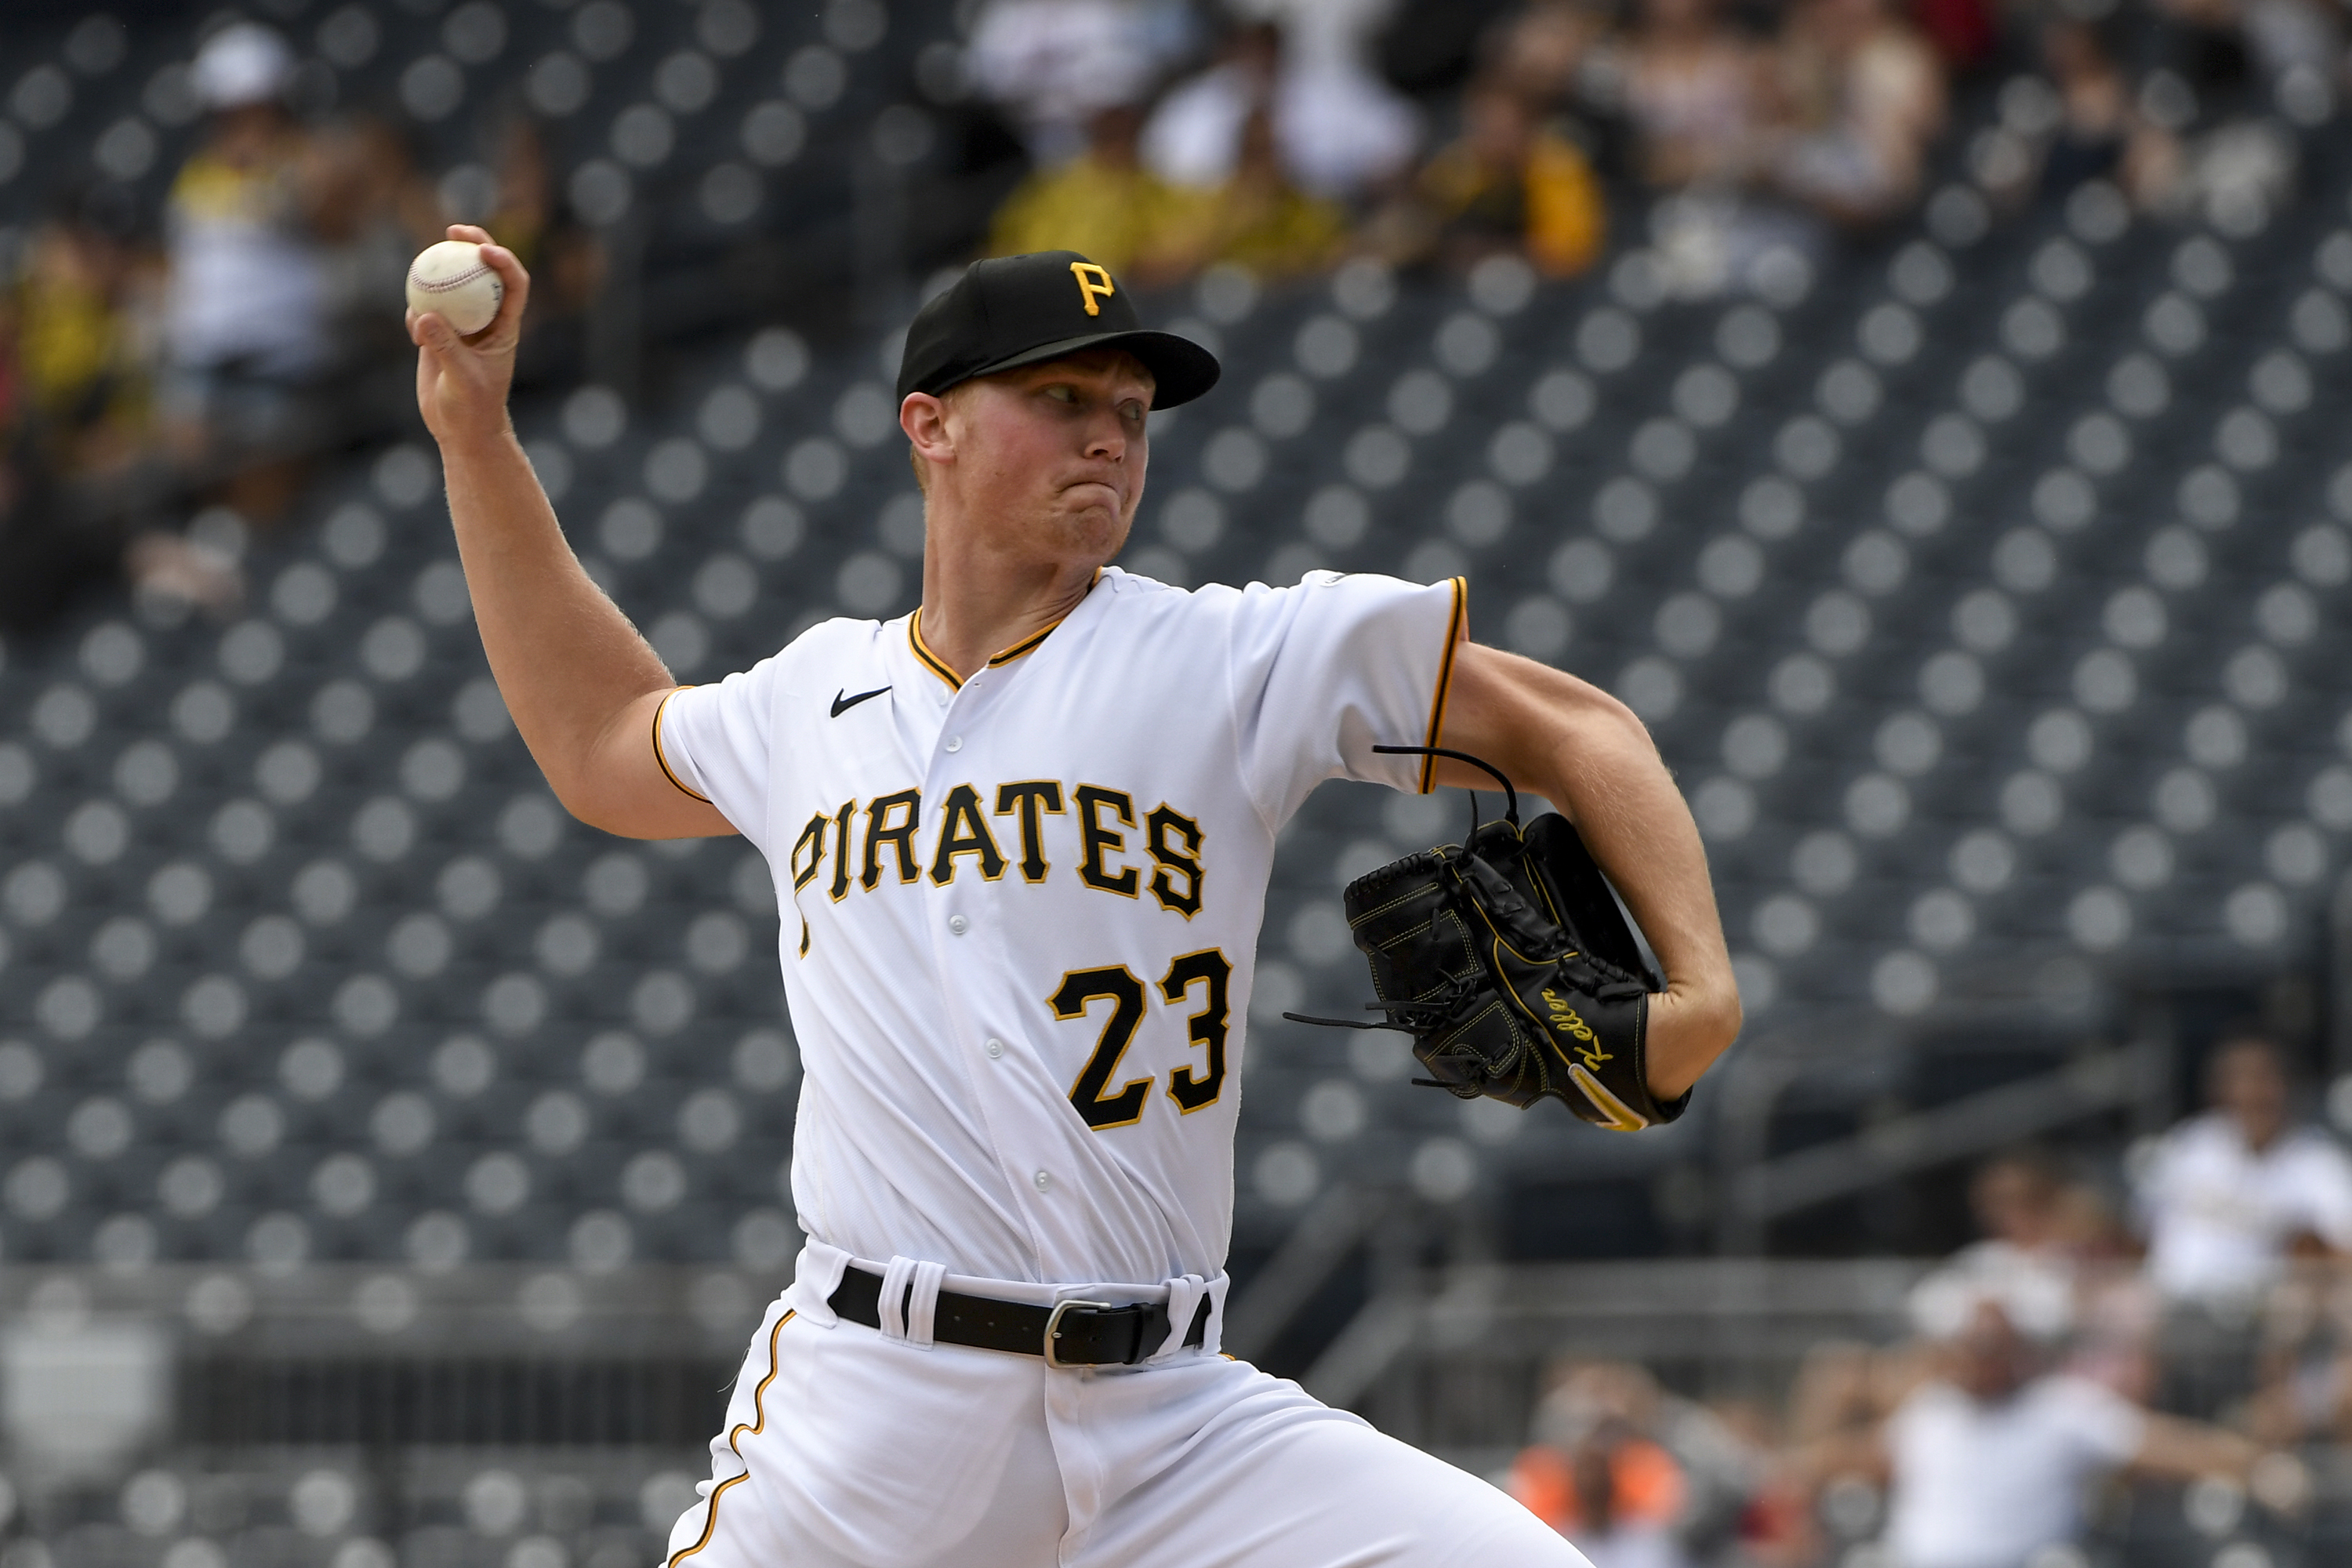 Pirates end losing skid, rally to edge Marlins 3-1